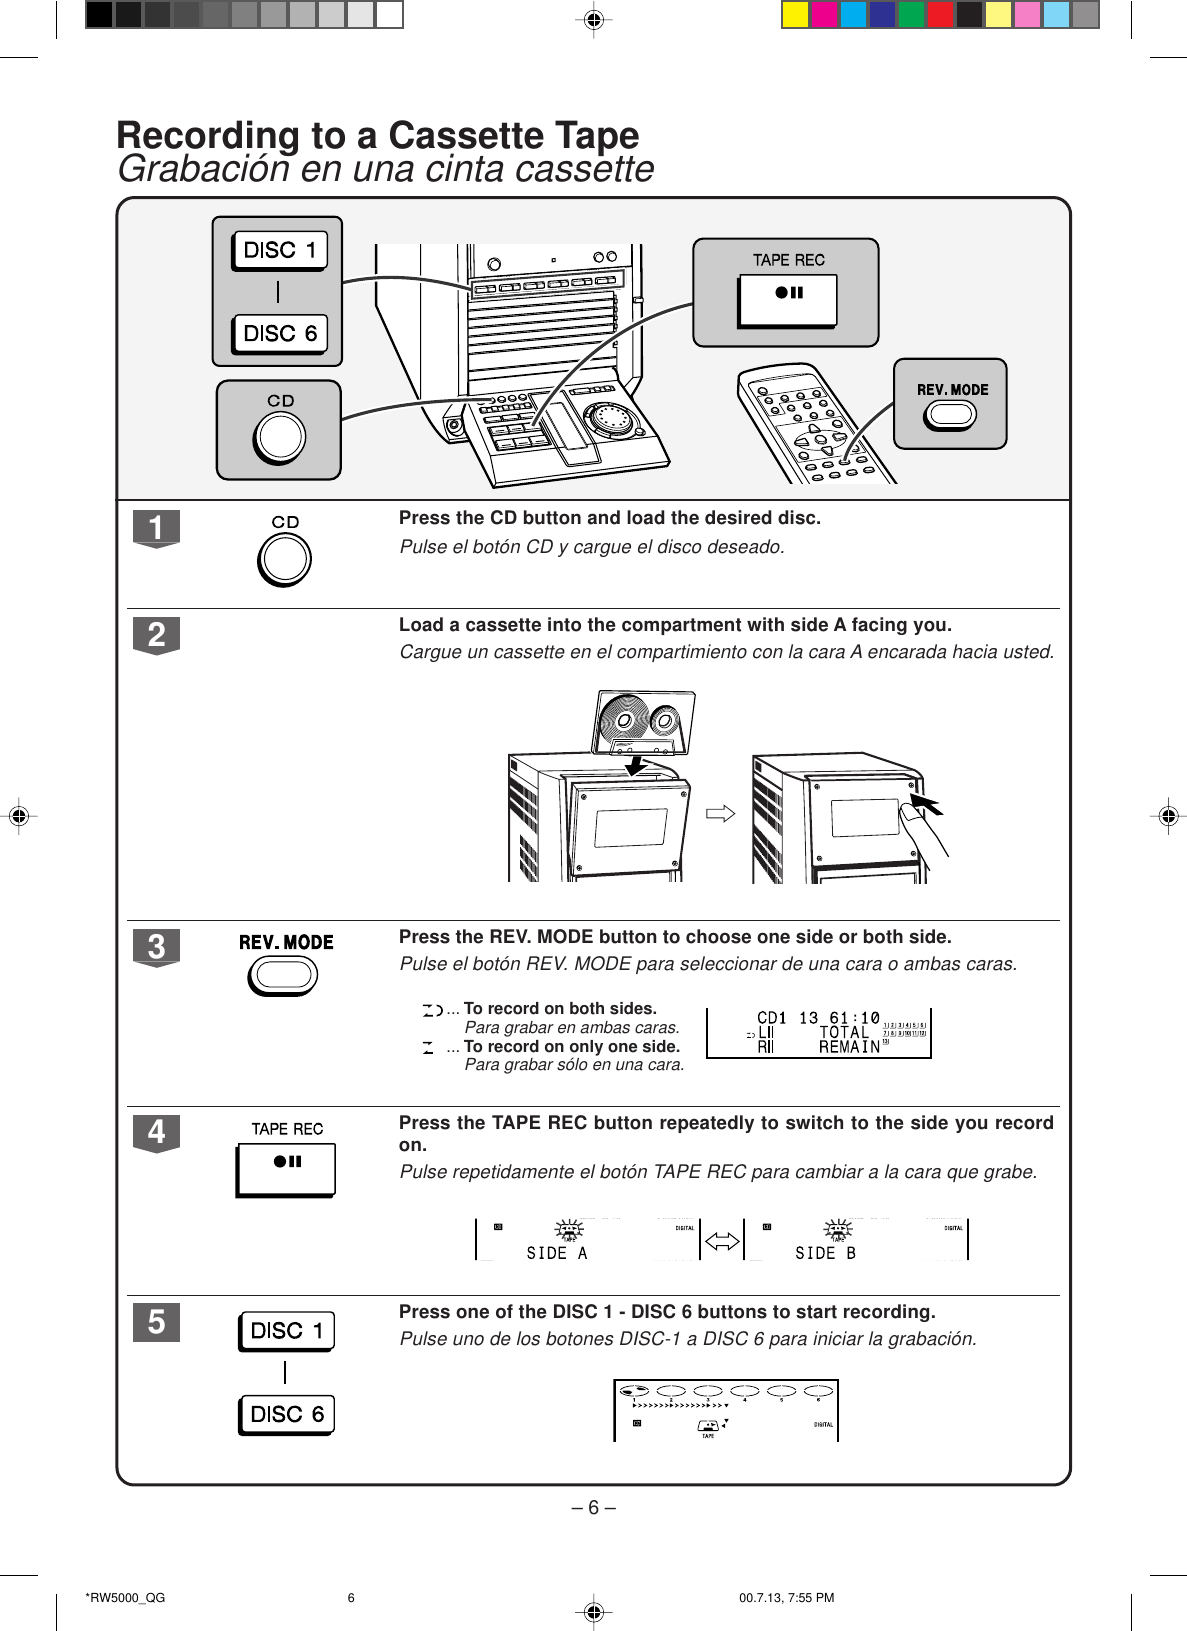 Page 6 of 8 - Sharp Cdrw5000-Quick-Guide CD-RW5000 Quick Start Guide